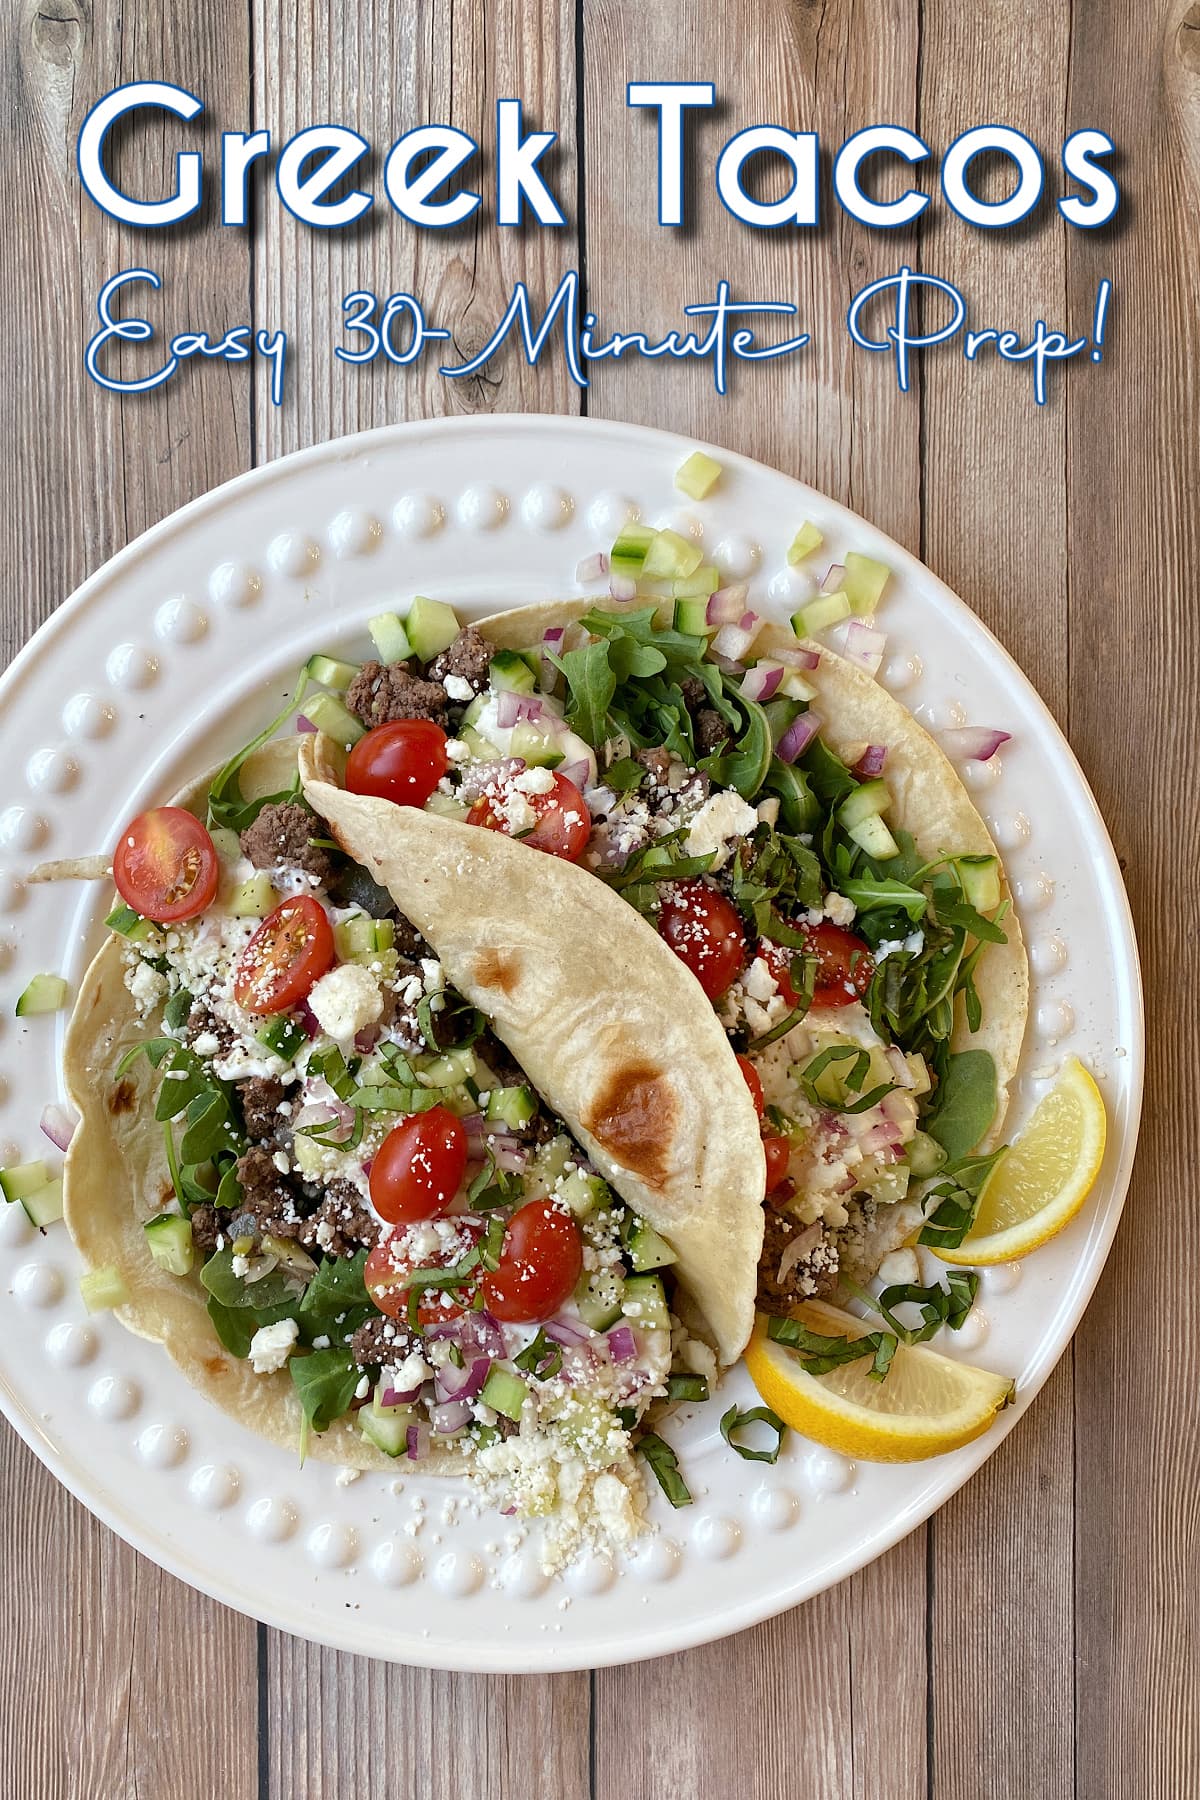 Two medium flour tortillas on a plate, filled with seasoned loose meat, arugula, feta, tomatoes, yogurt, basil ribbons; garnished with lemon slices. Pin text overlay reads: Greek Tacos | Easy 30-Minute Prep!